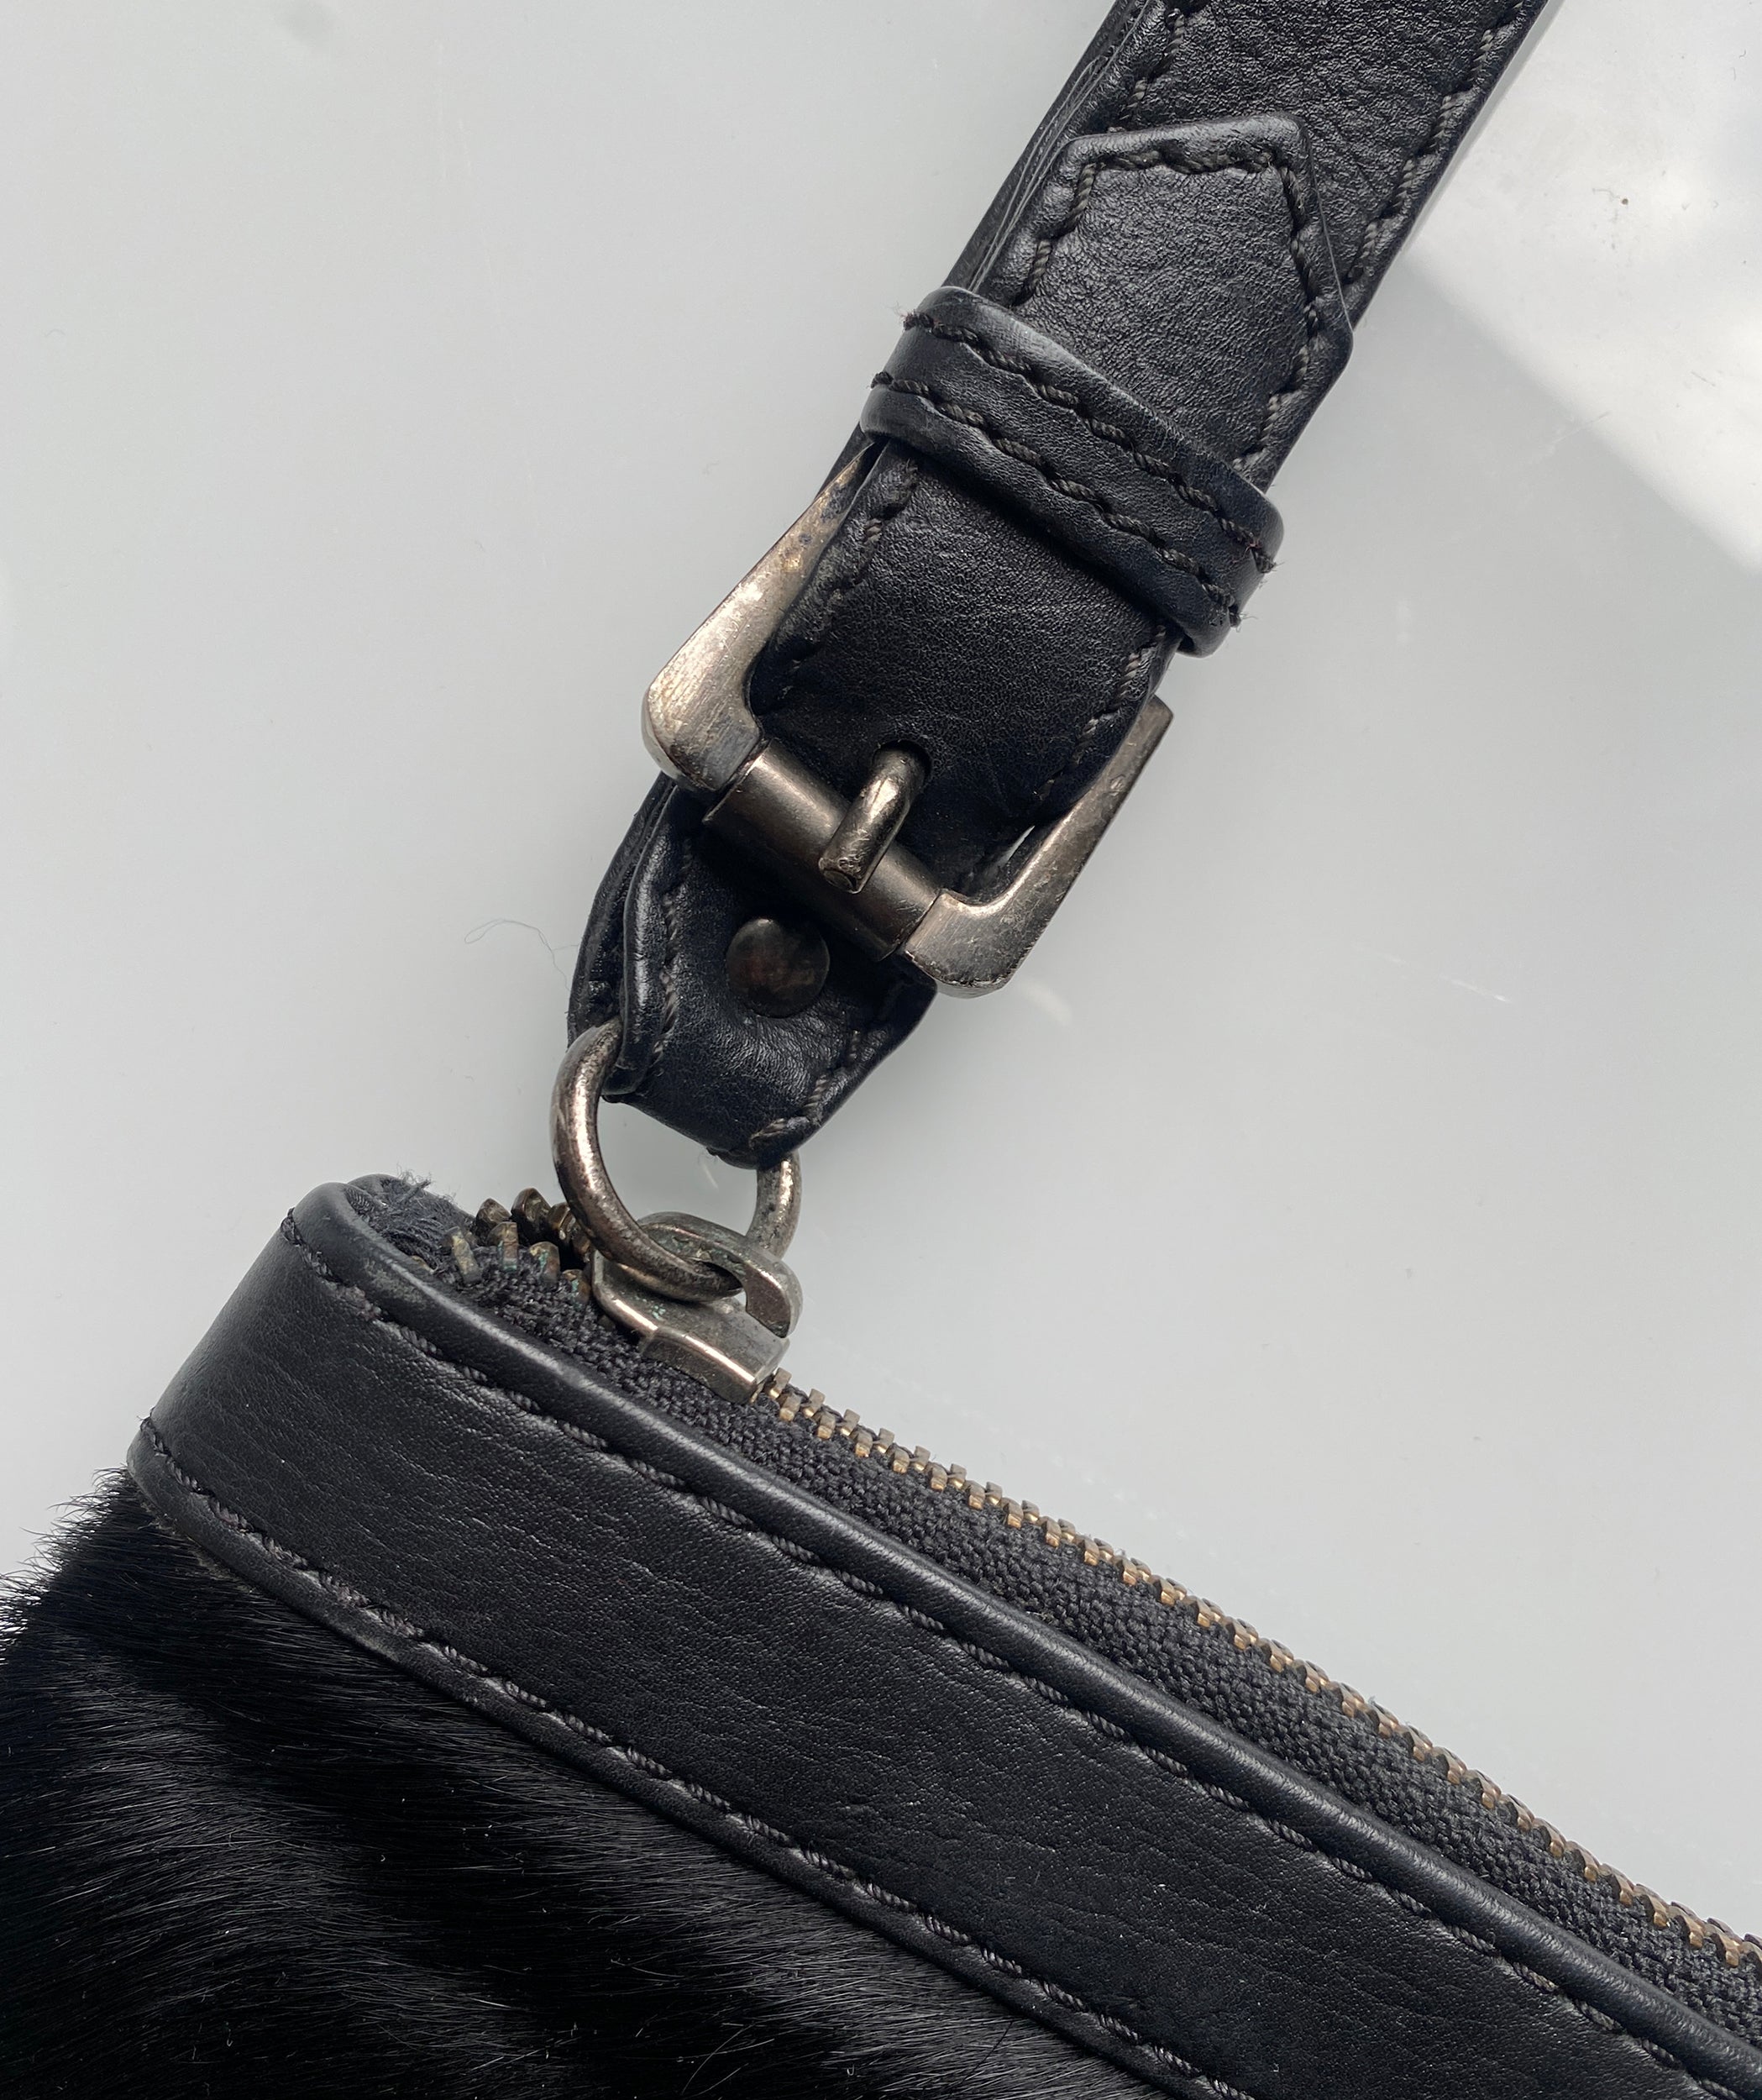 Natural Leather &amp; Fur Pouch